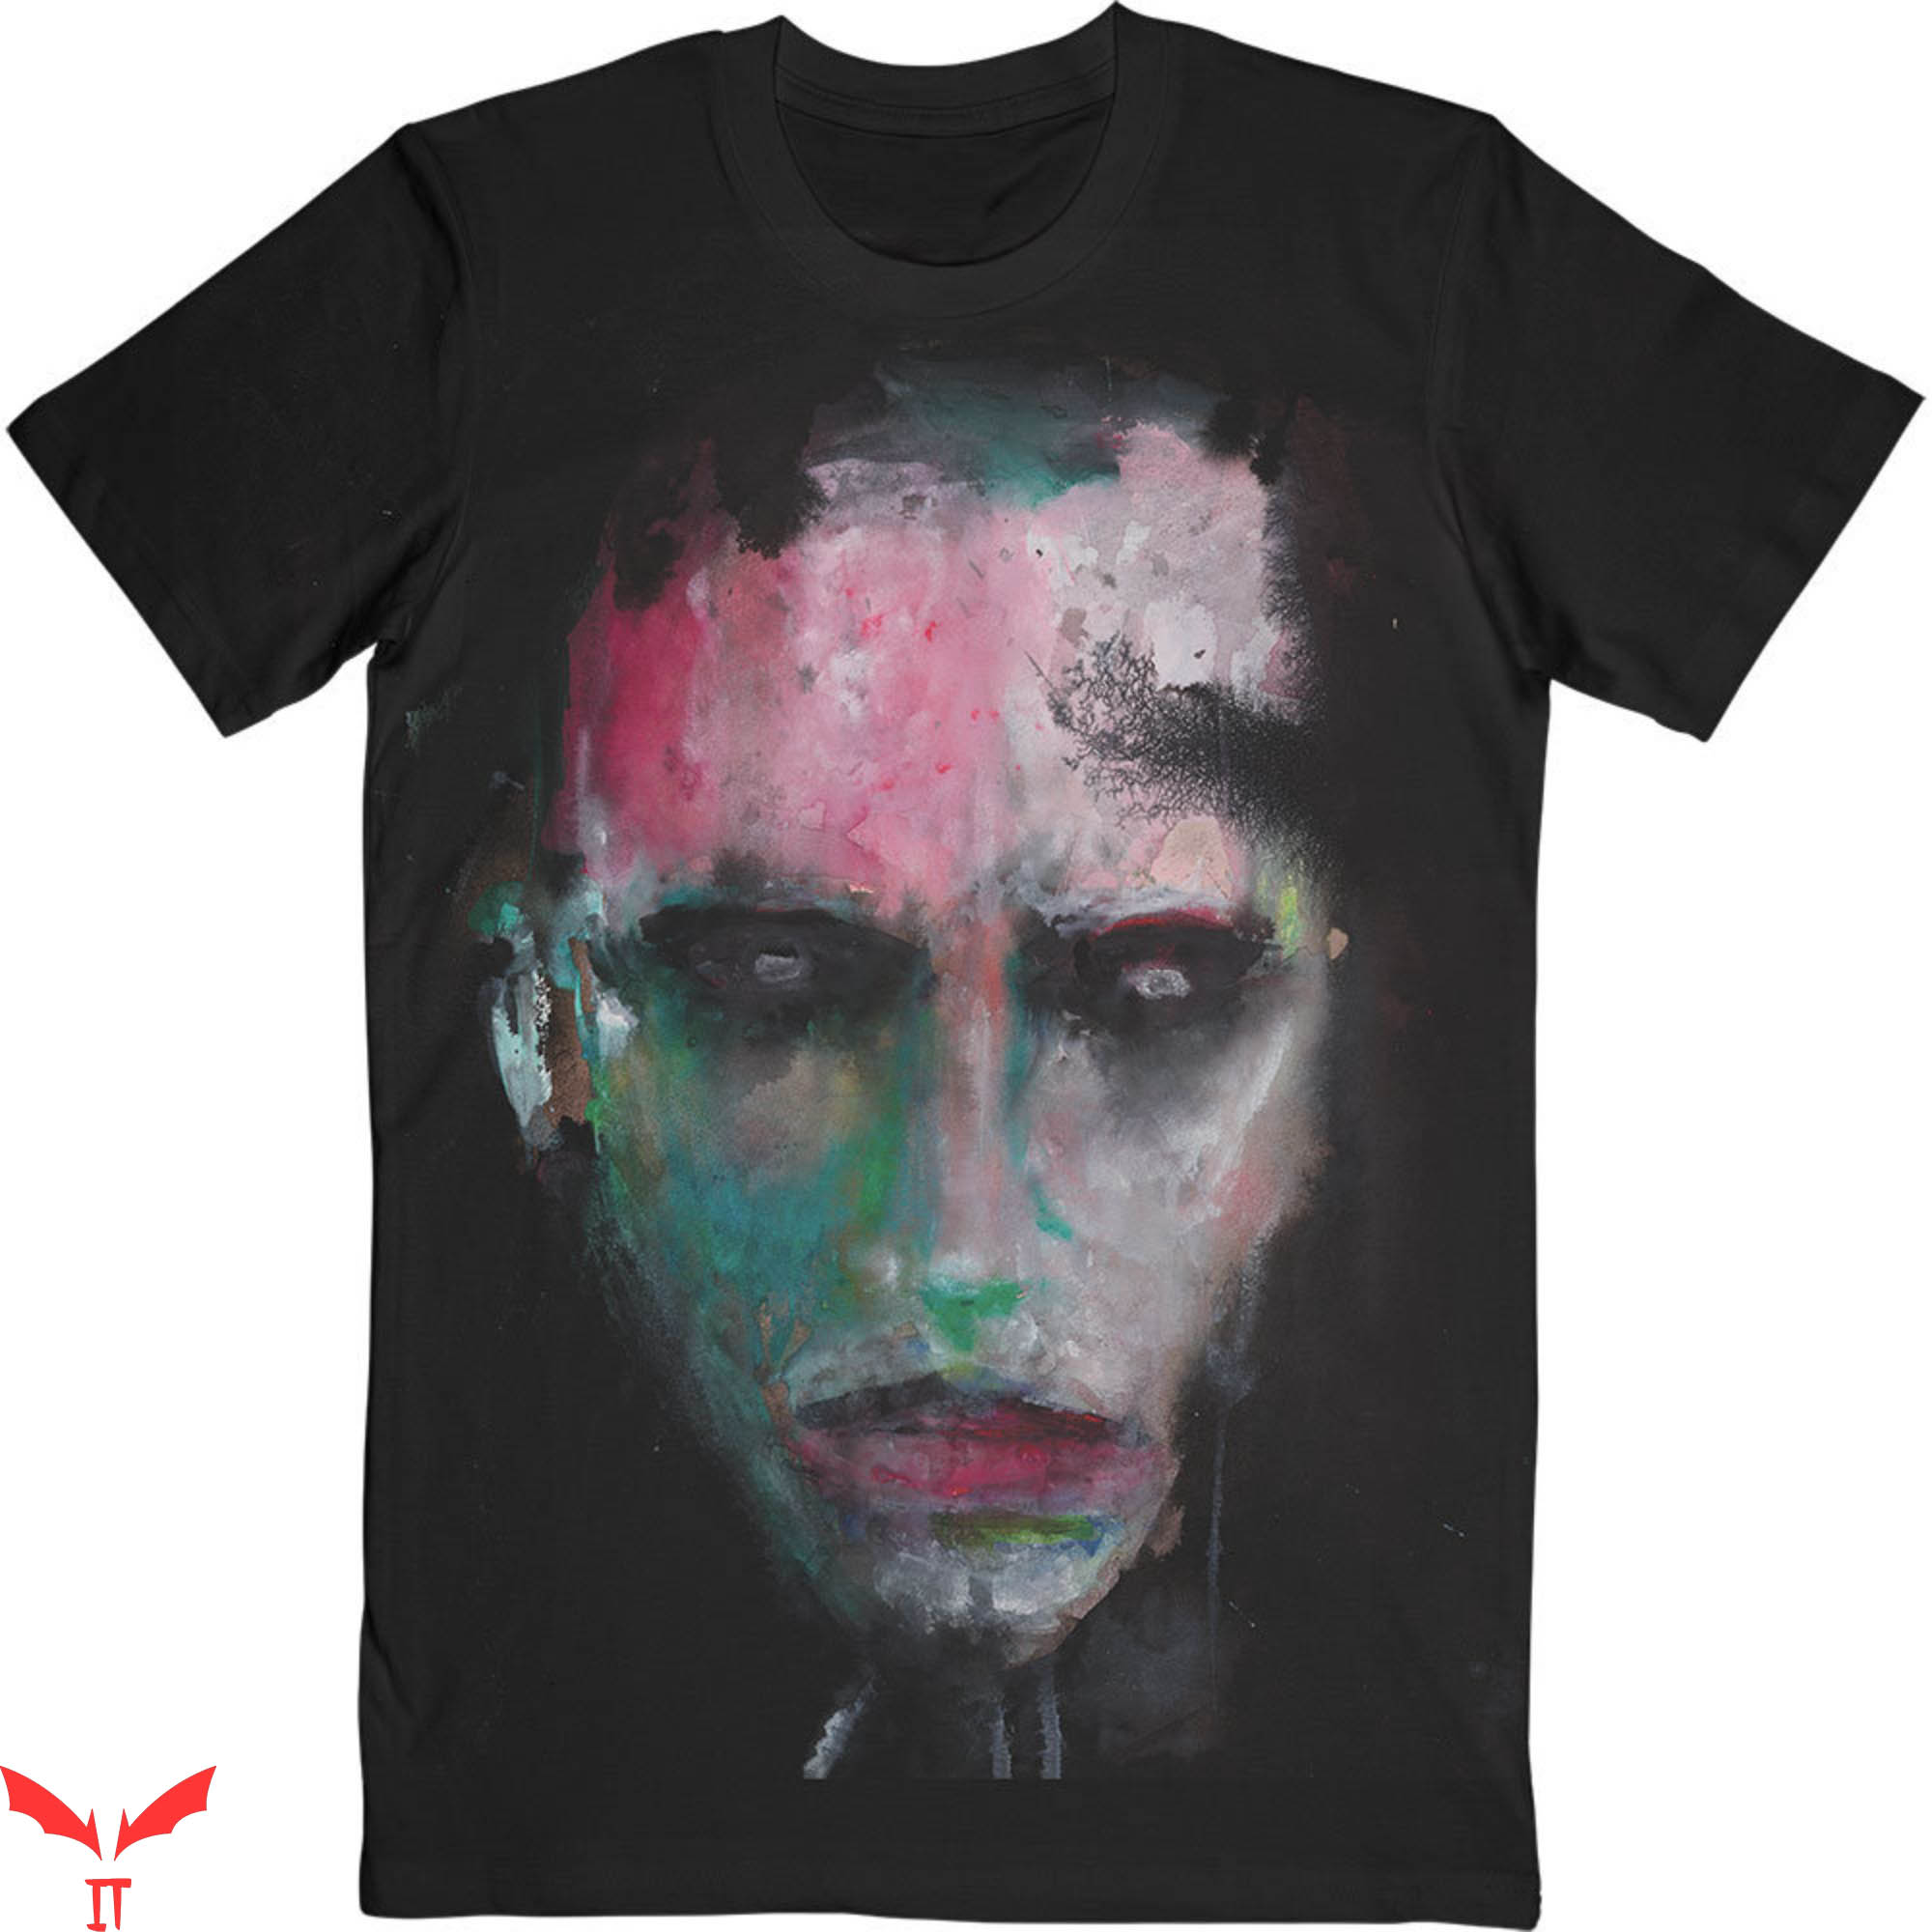 Marilyn Manson Vintage T-Shirt We Are Chaos Rock Musician